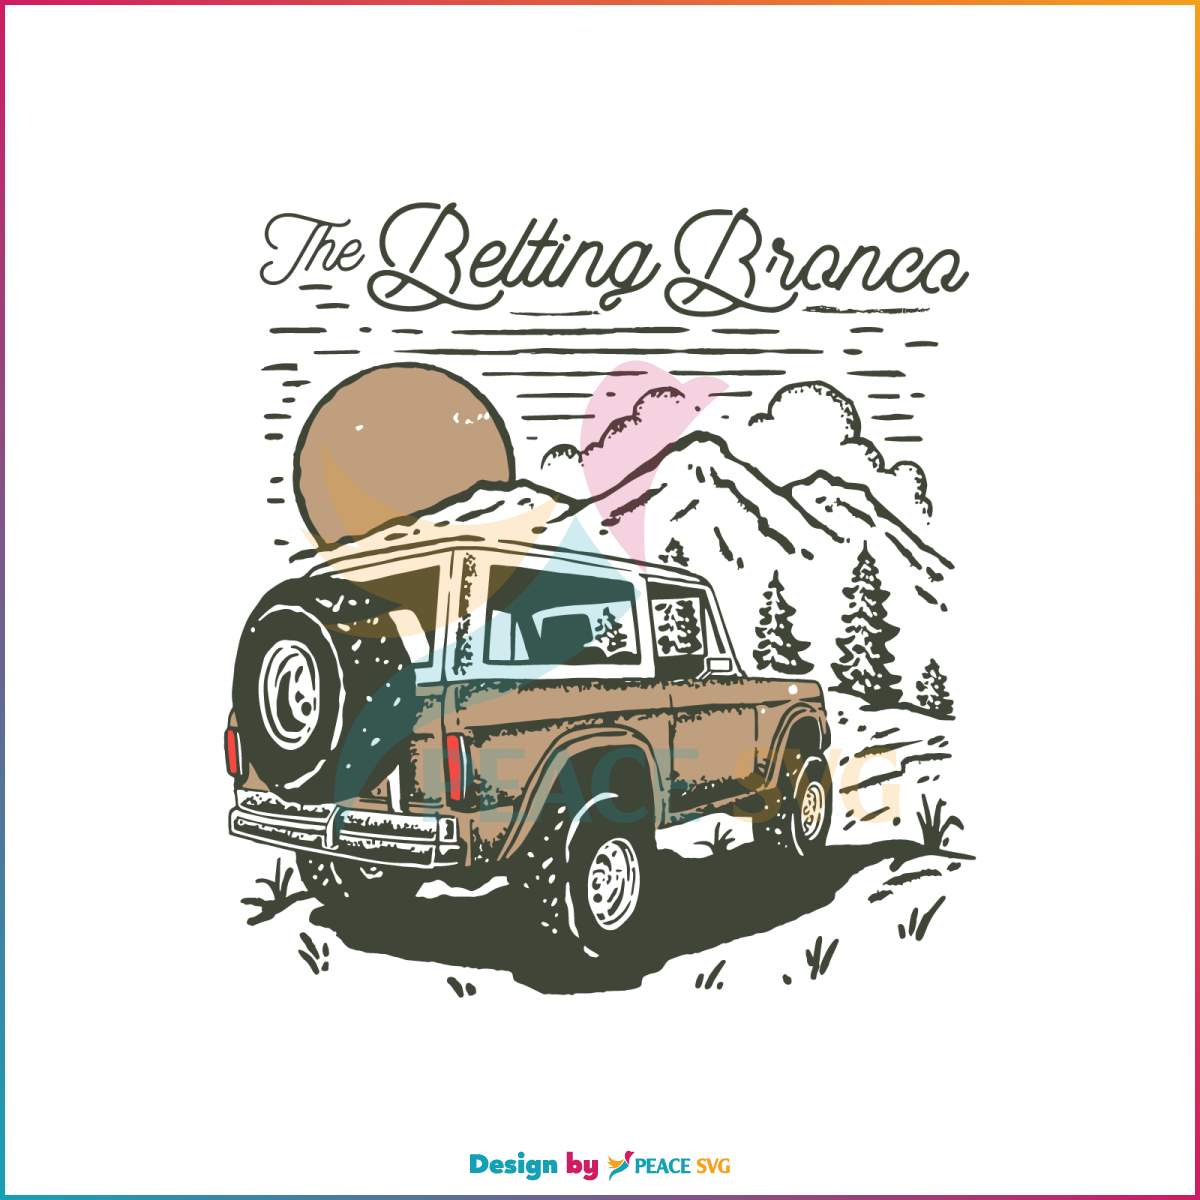 the-belting-bronco-zach-bryan-svg-country-music-svg-file